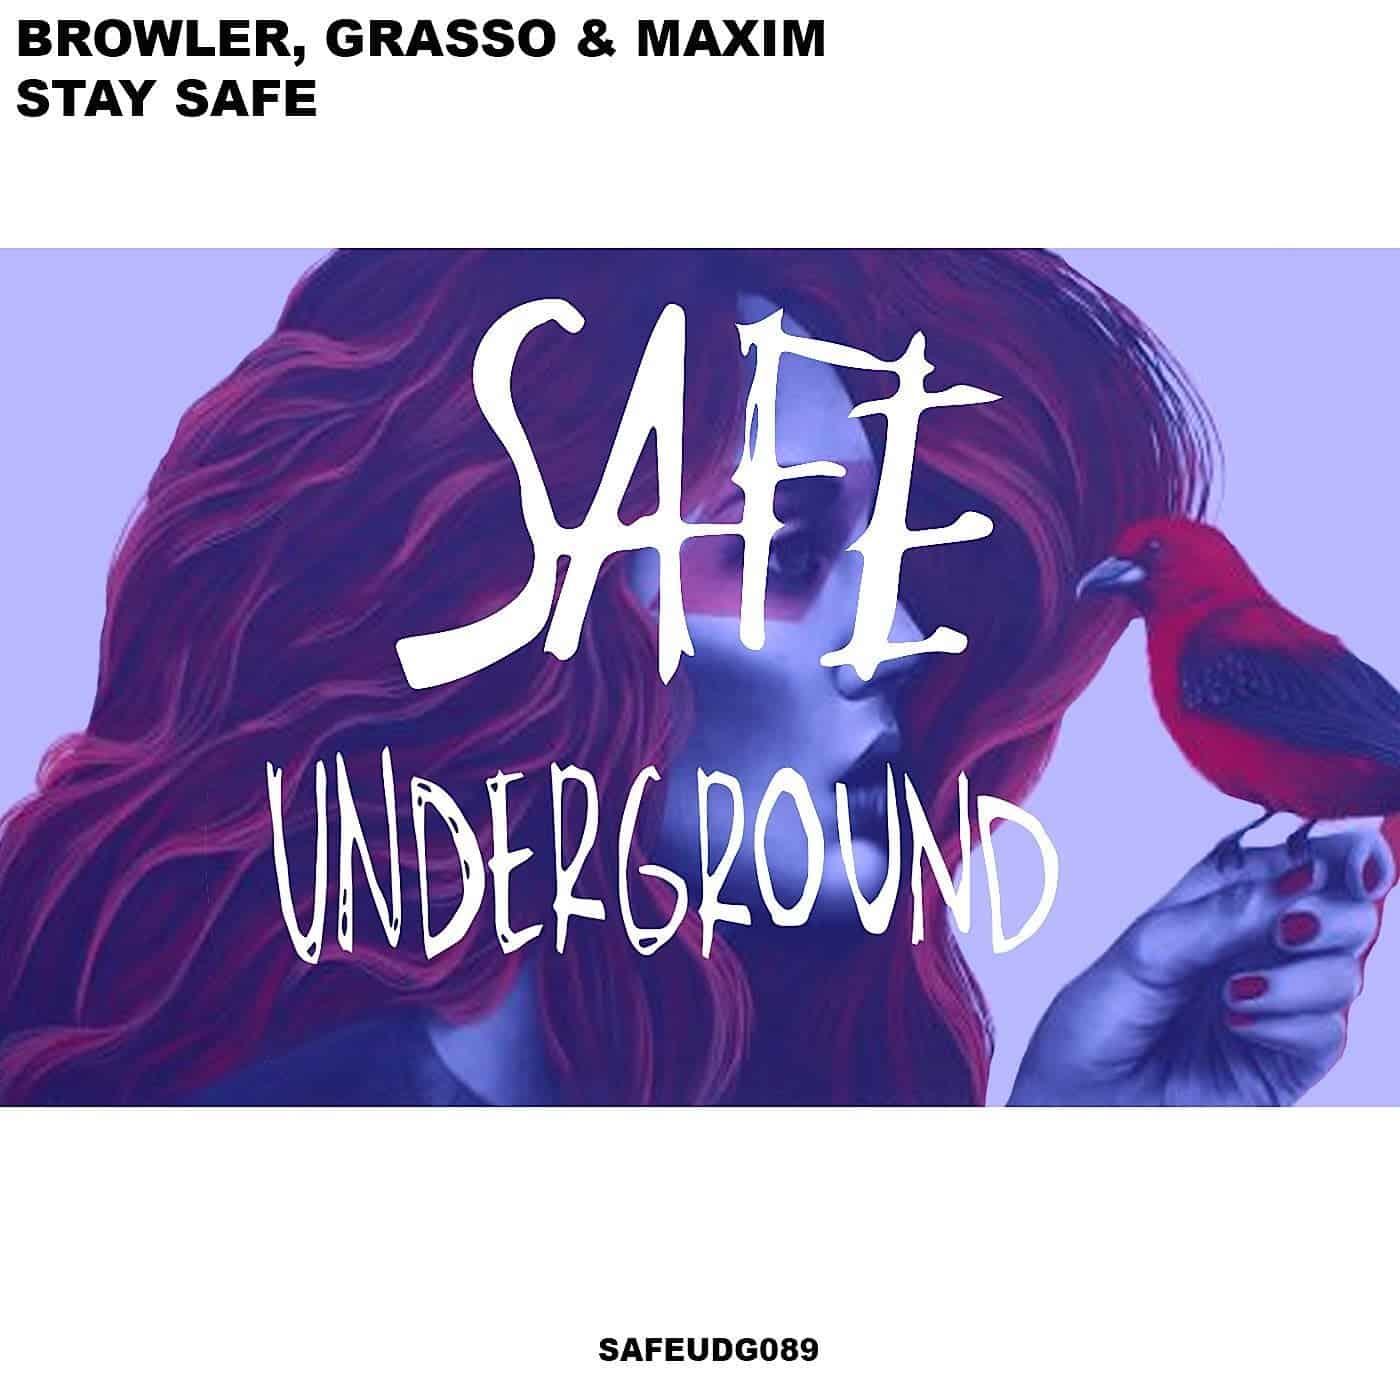 image cover: Grasso & Maxim, Browler - Stay Safe EP / SAFEUDG089